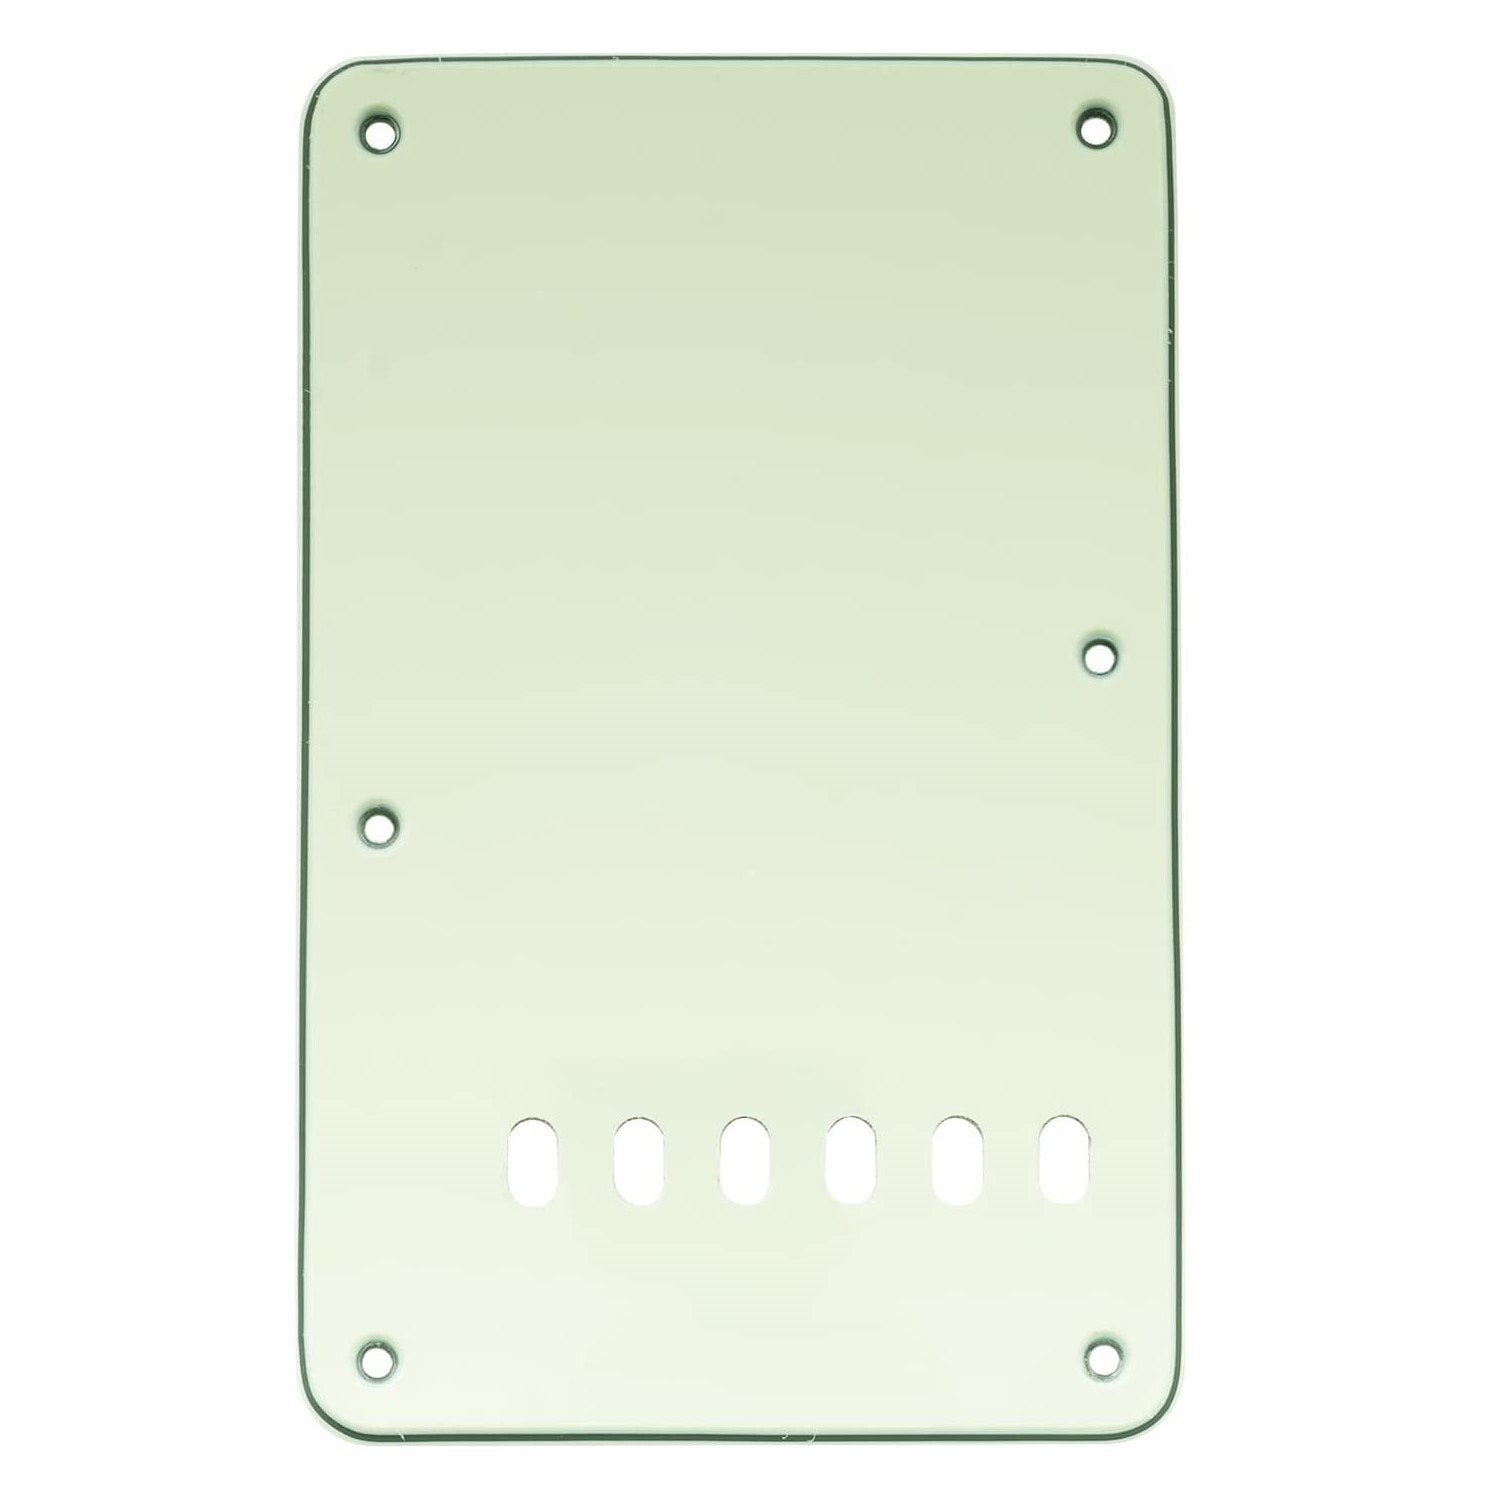 Traditional Vintage Style Backplate for Stratocaster Guitar